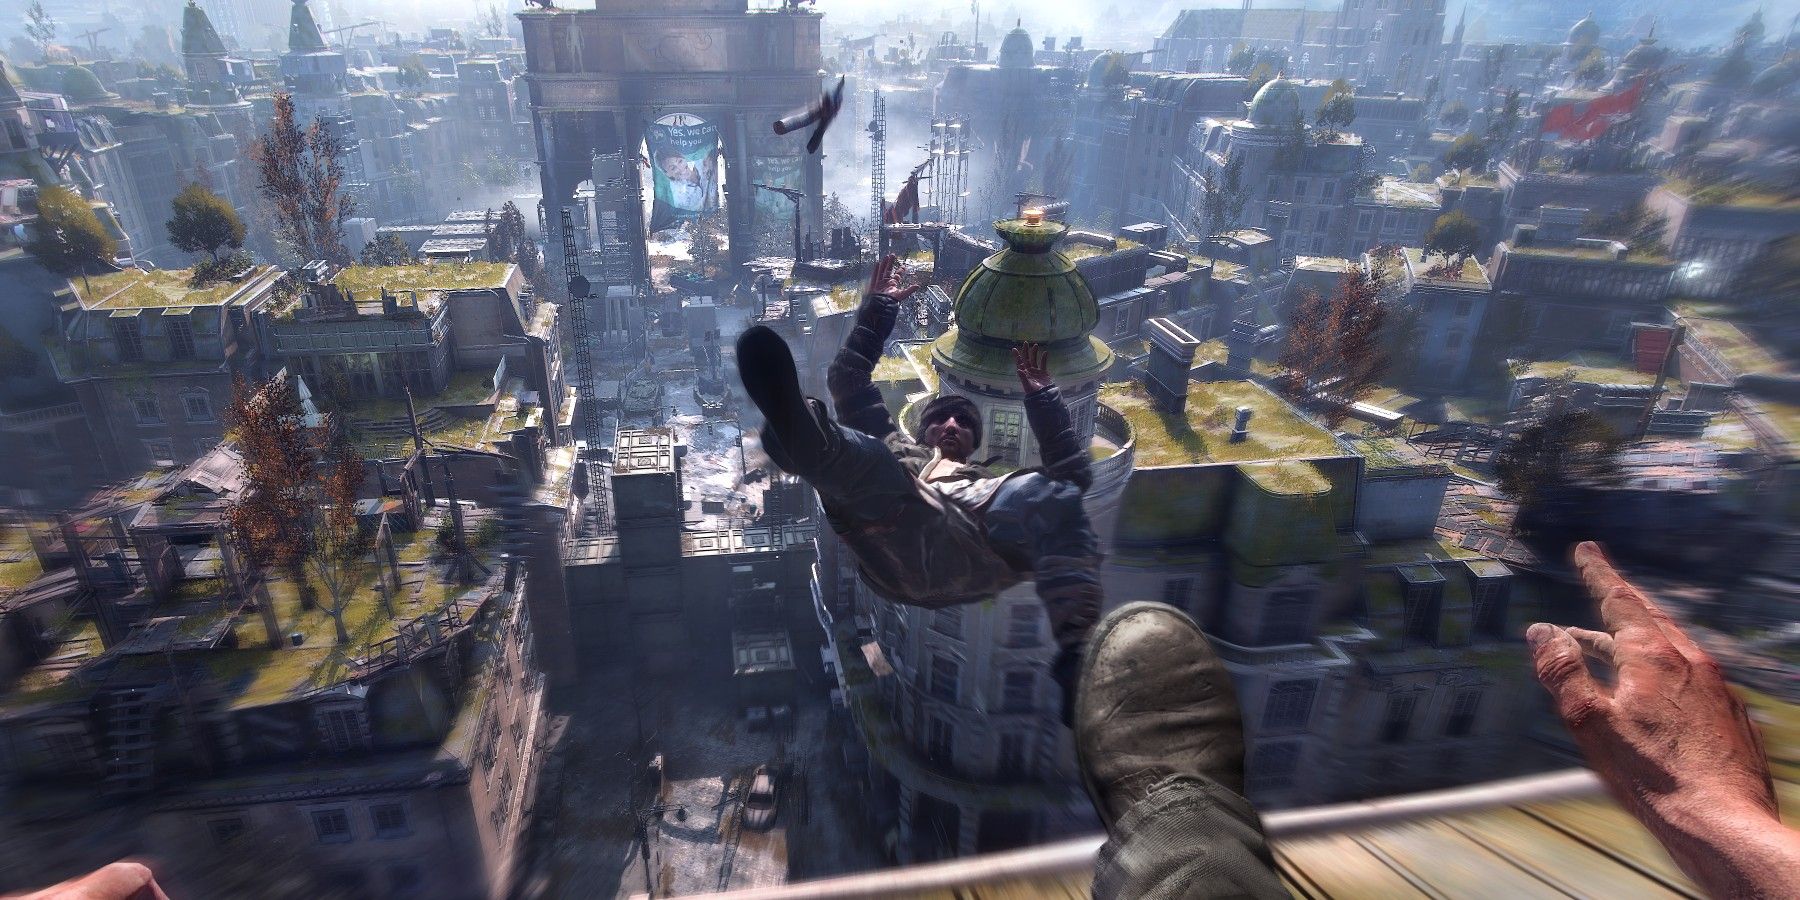 Mini-review: No, I don't want to play Dying Light 2 for 500 hours